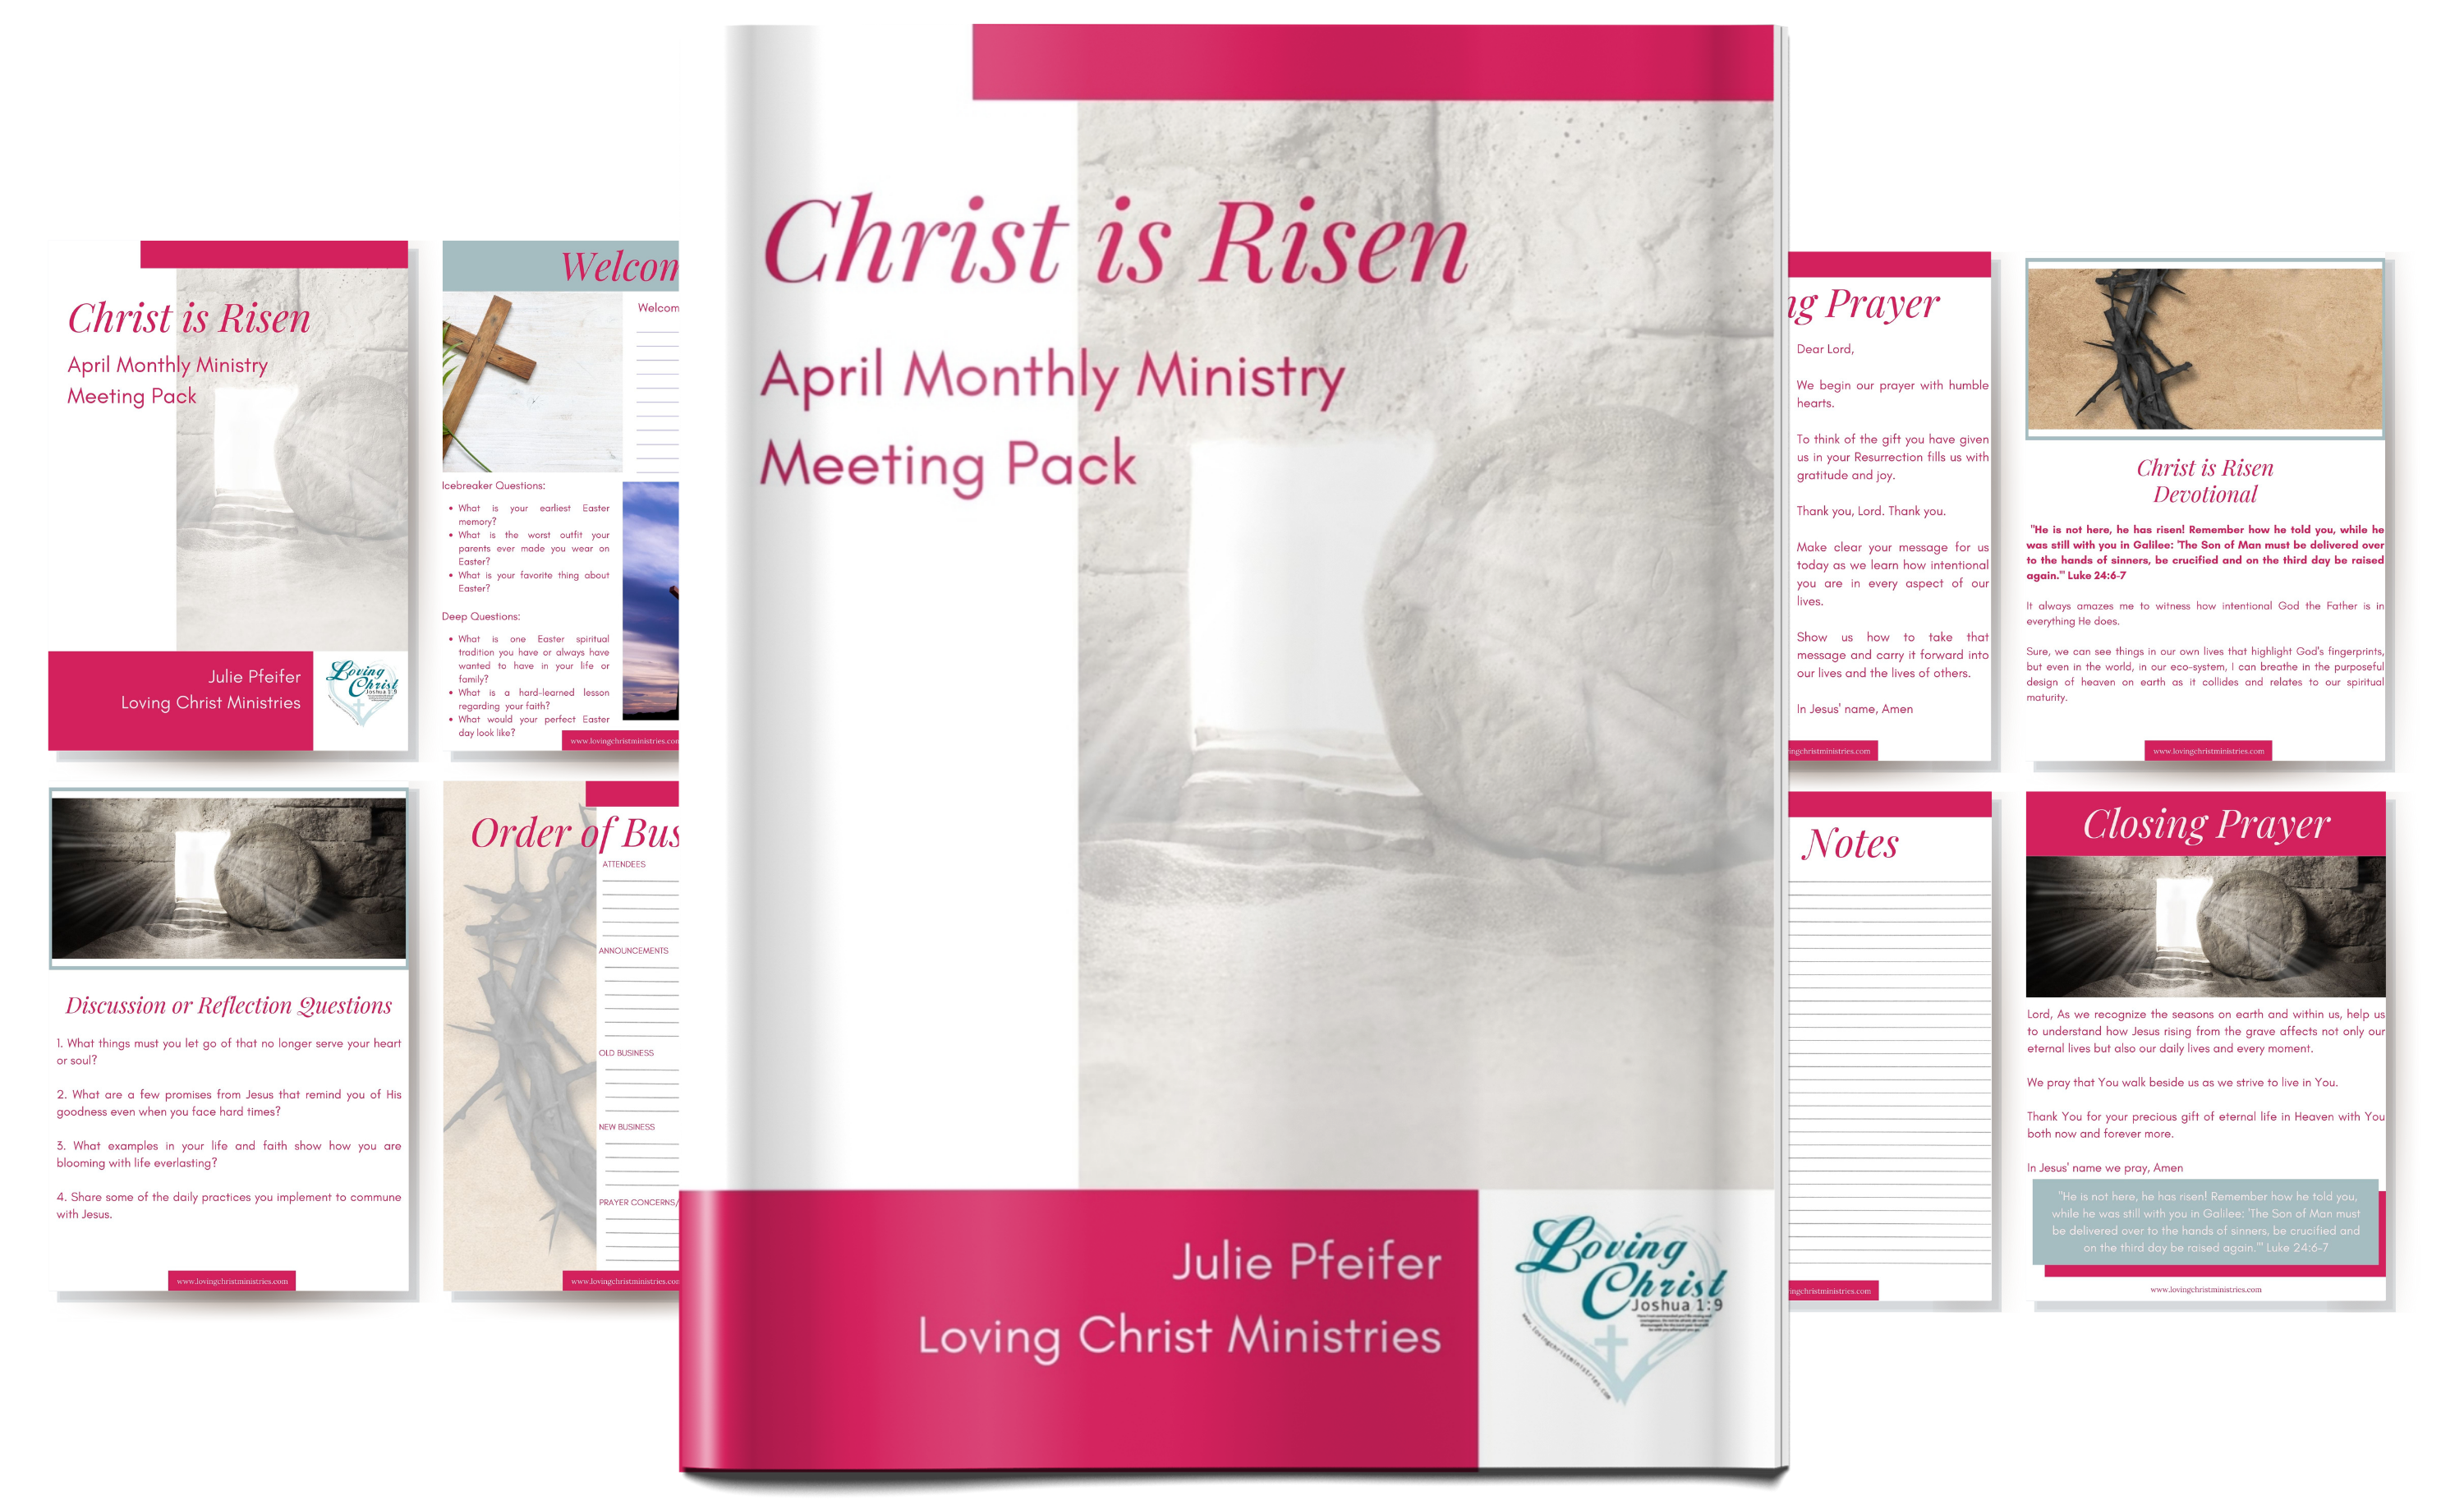 Christ is Risen - April Monthly Ministry Meeting Pack